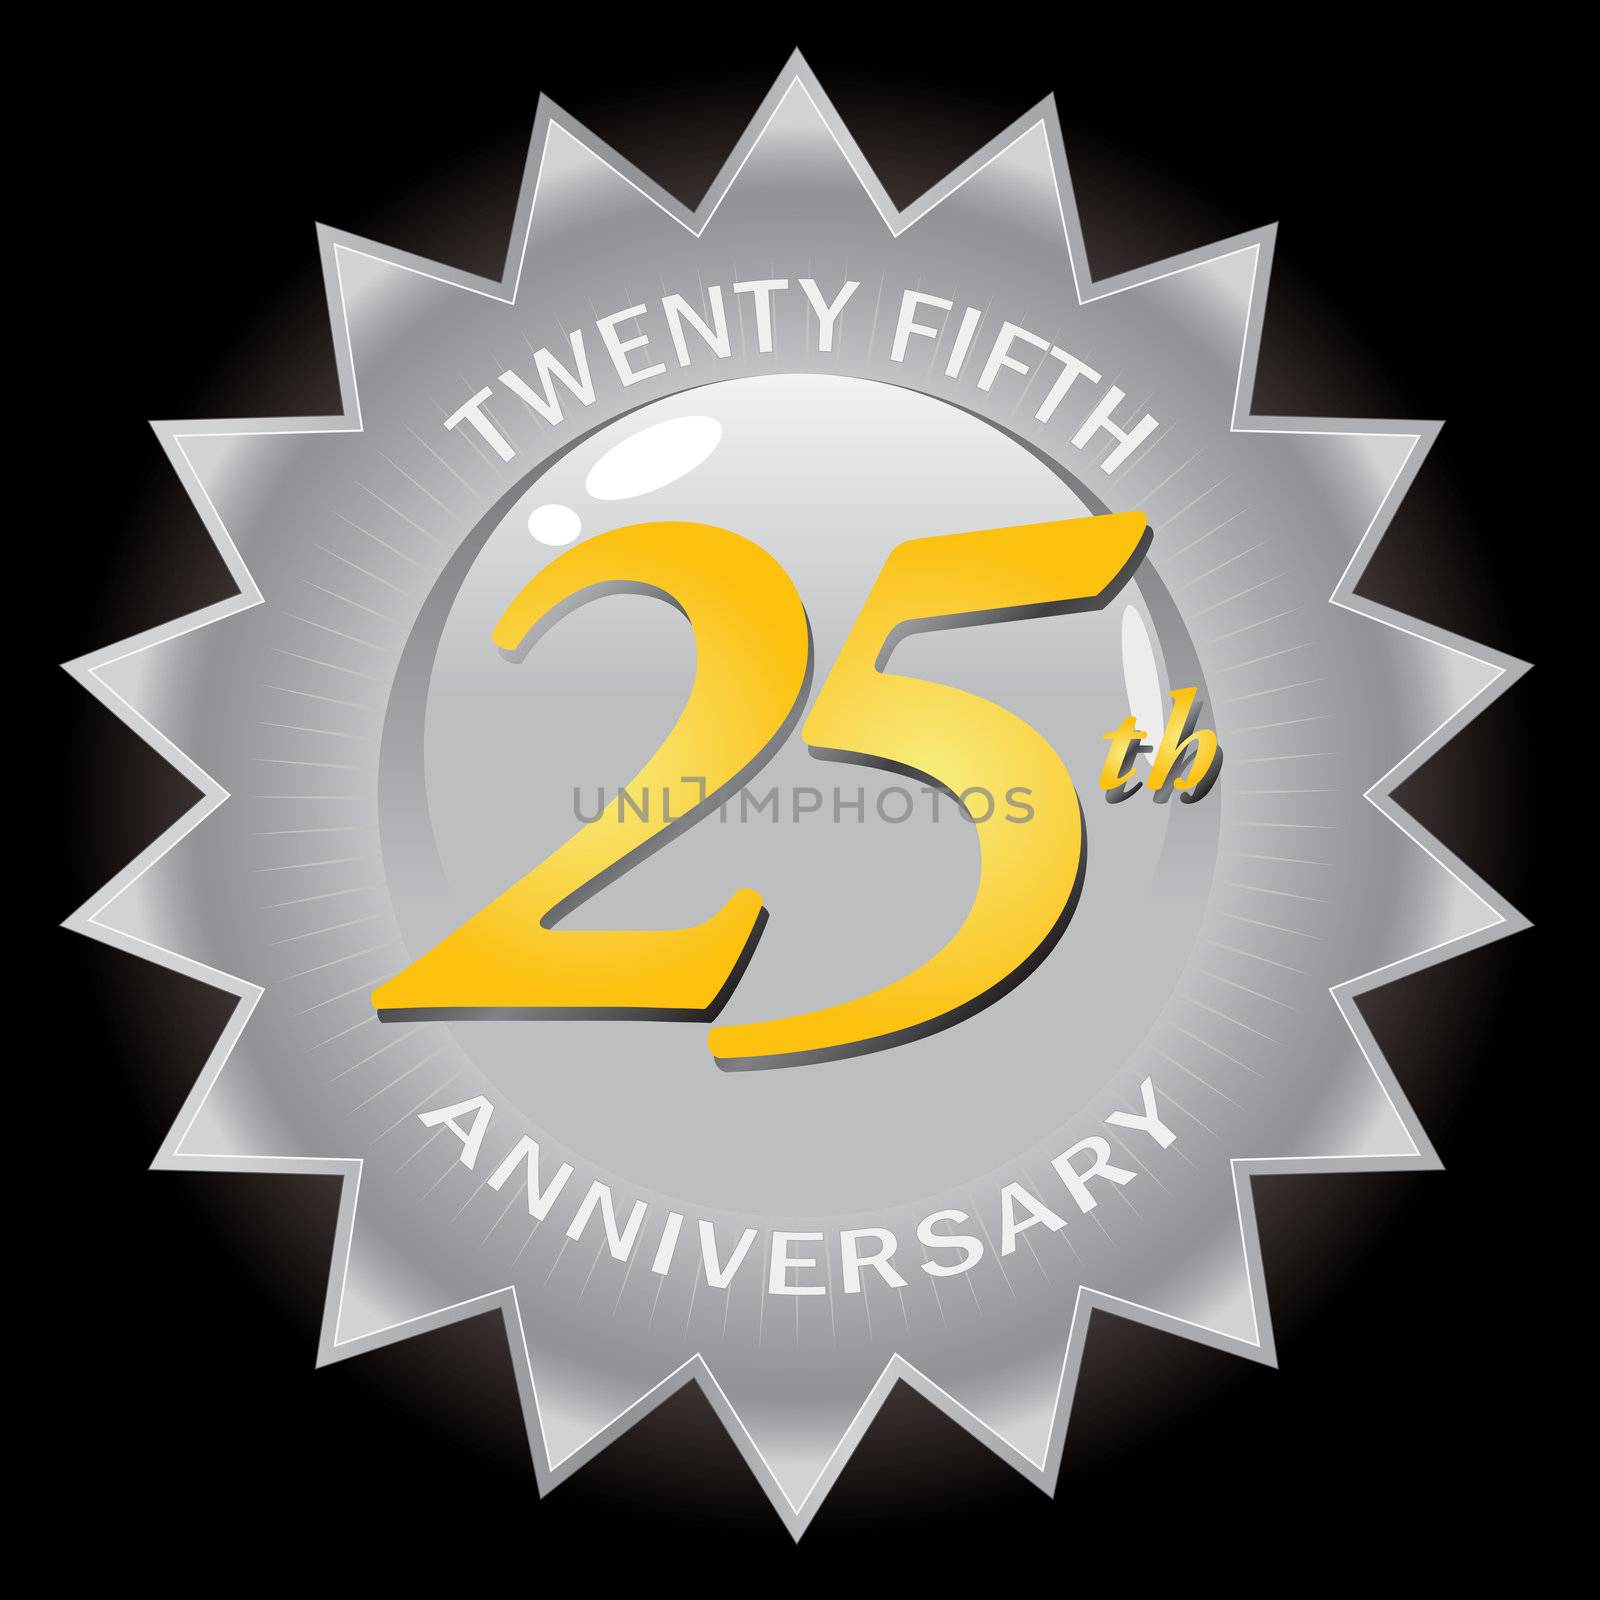 A silver twenty fifth 25th anniversary seal isolated over a black background.  This vector image is easily customized to suit your needs.